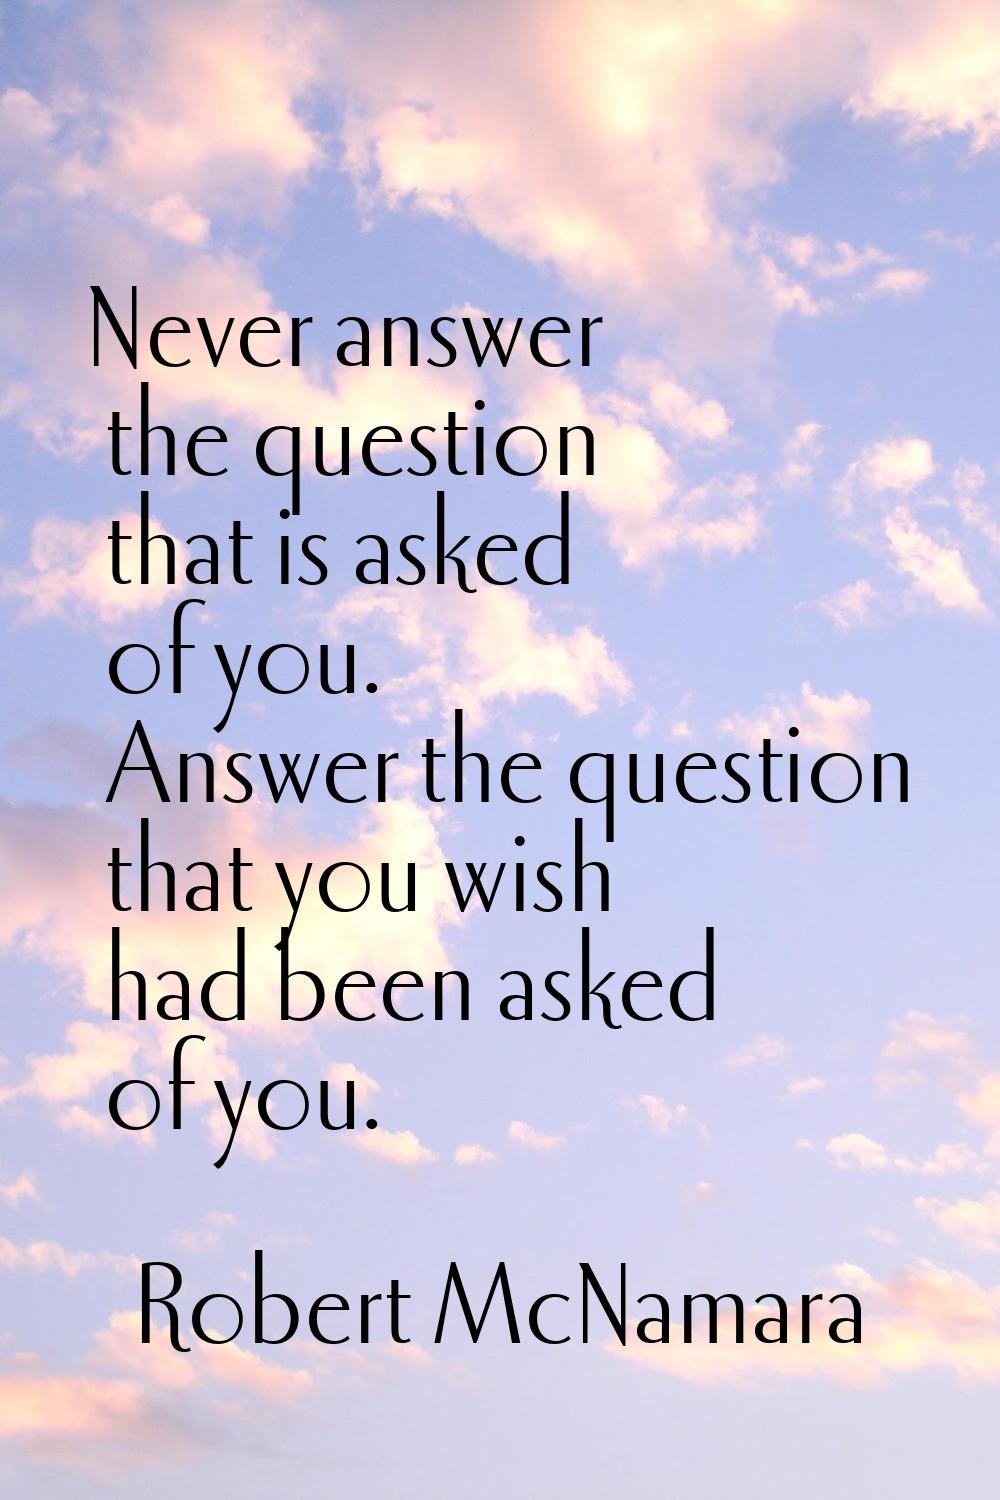 Never answer the question that is asked of you. Answer the question that you wish had been asked of